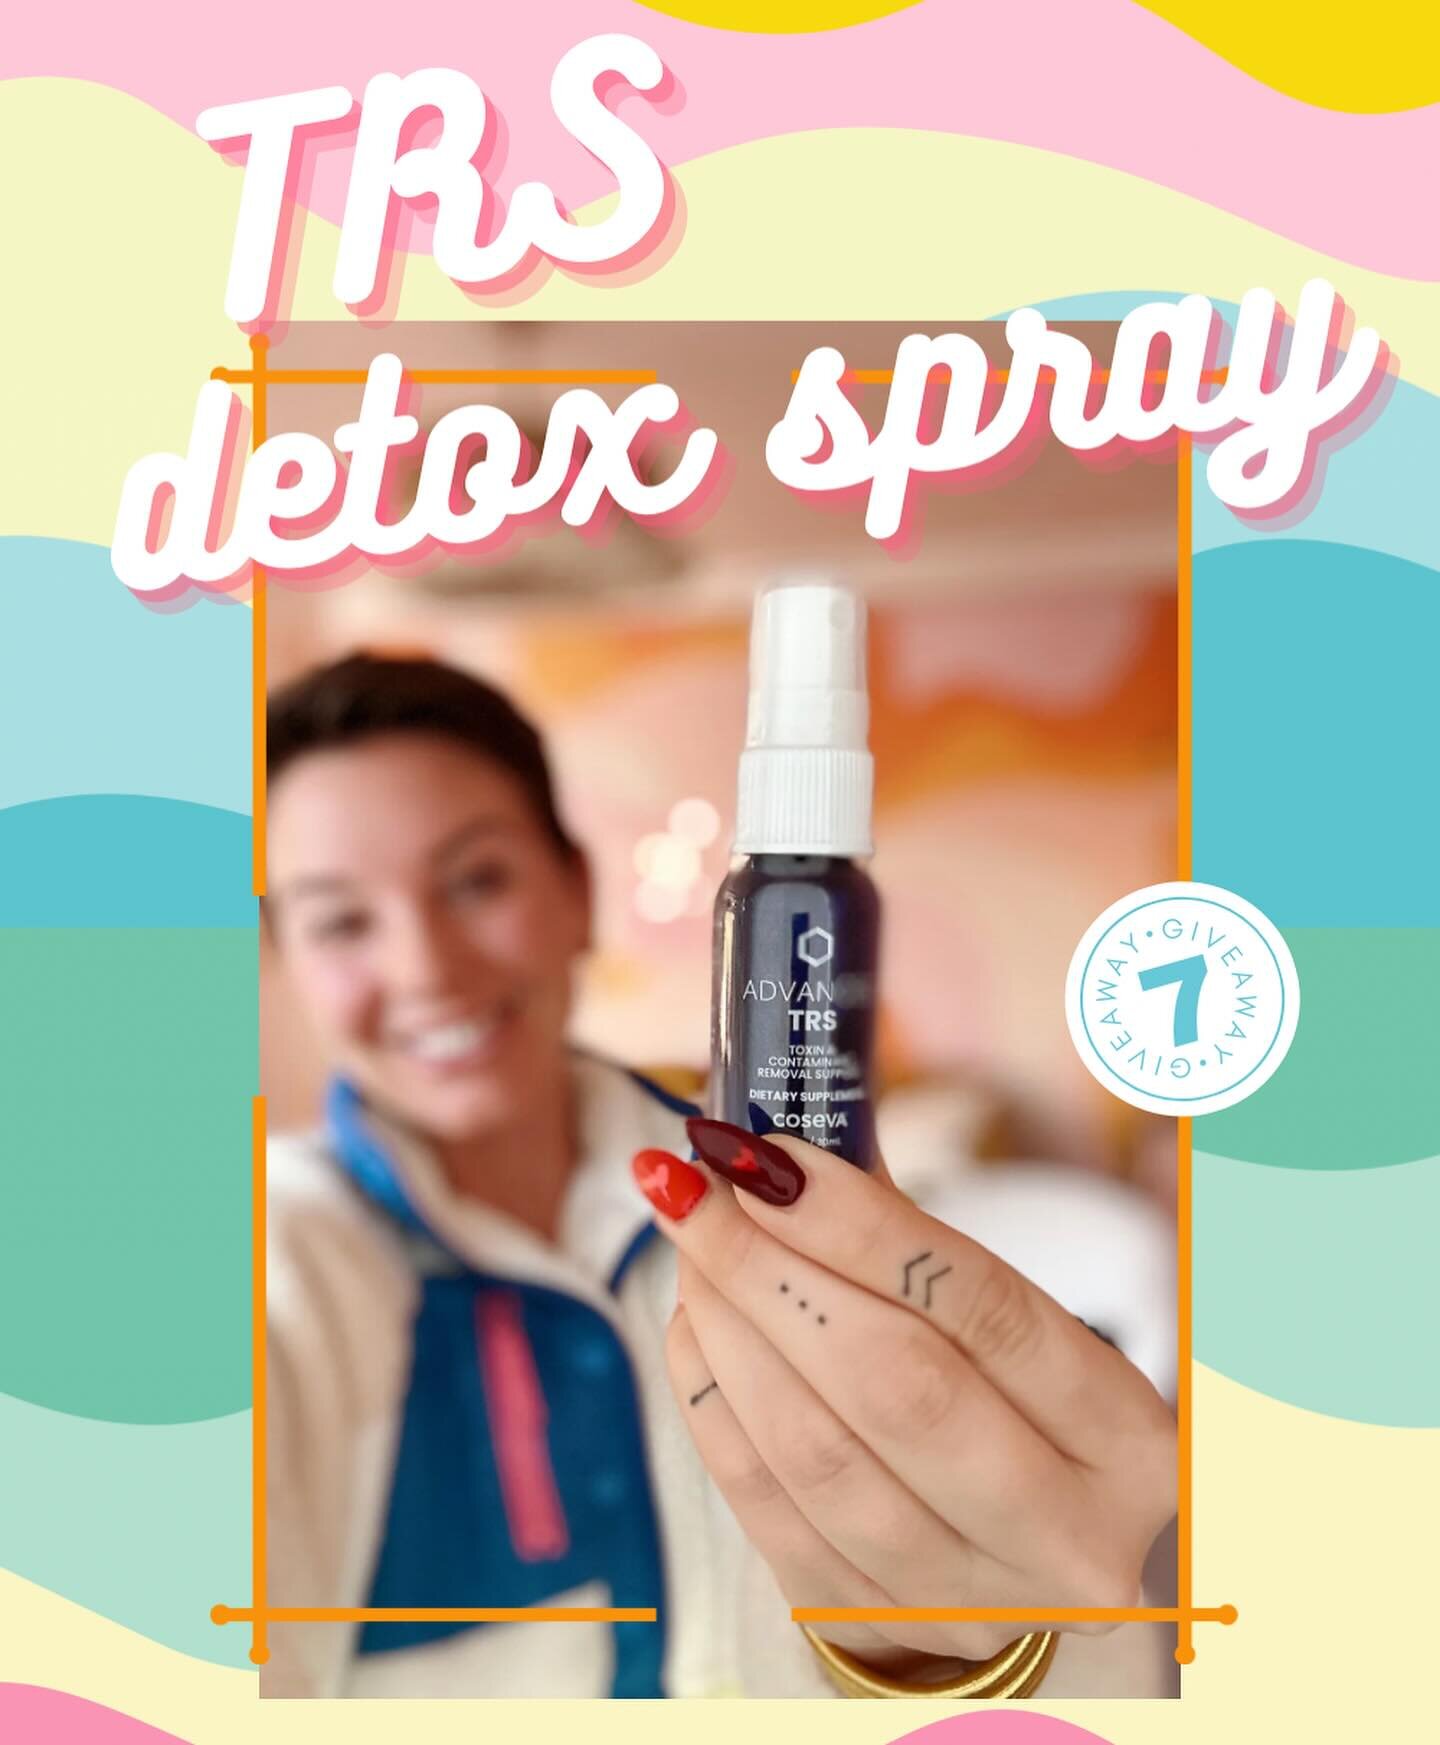 🎉Day 7 of my health and wellness giveaways: TRS DETOX SPRAY (TWO WINNERS)

Advanced TRS Detox Spray is a safe, water based, zeolite toxin removal spray. This little bottle can remove over 80,000 toxins and heavy metals! It was one of the first detox